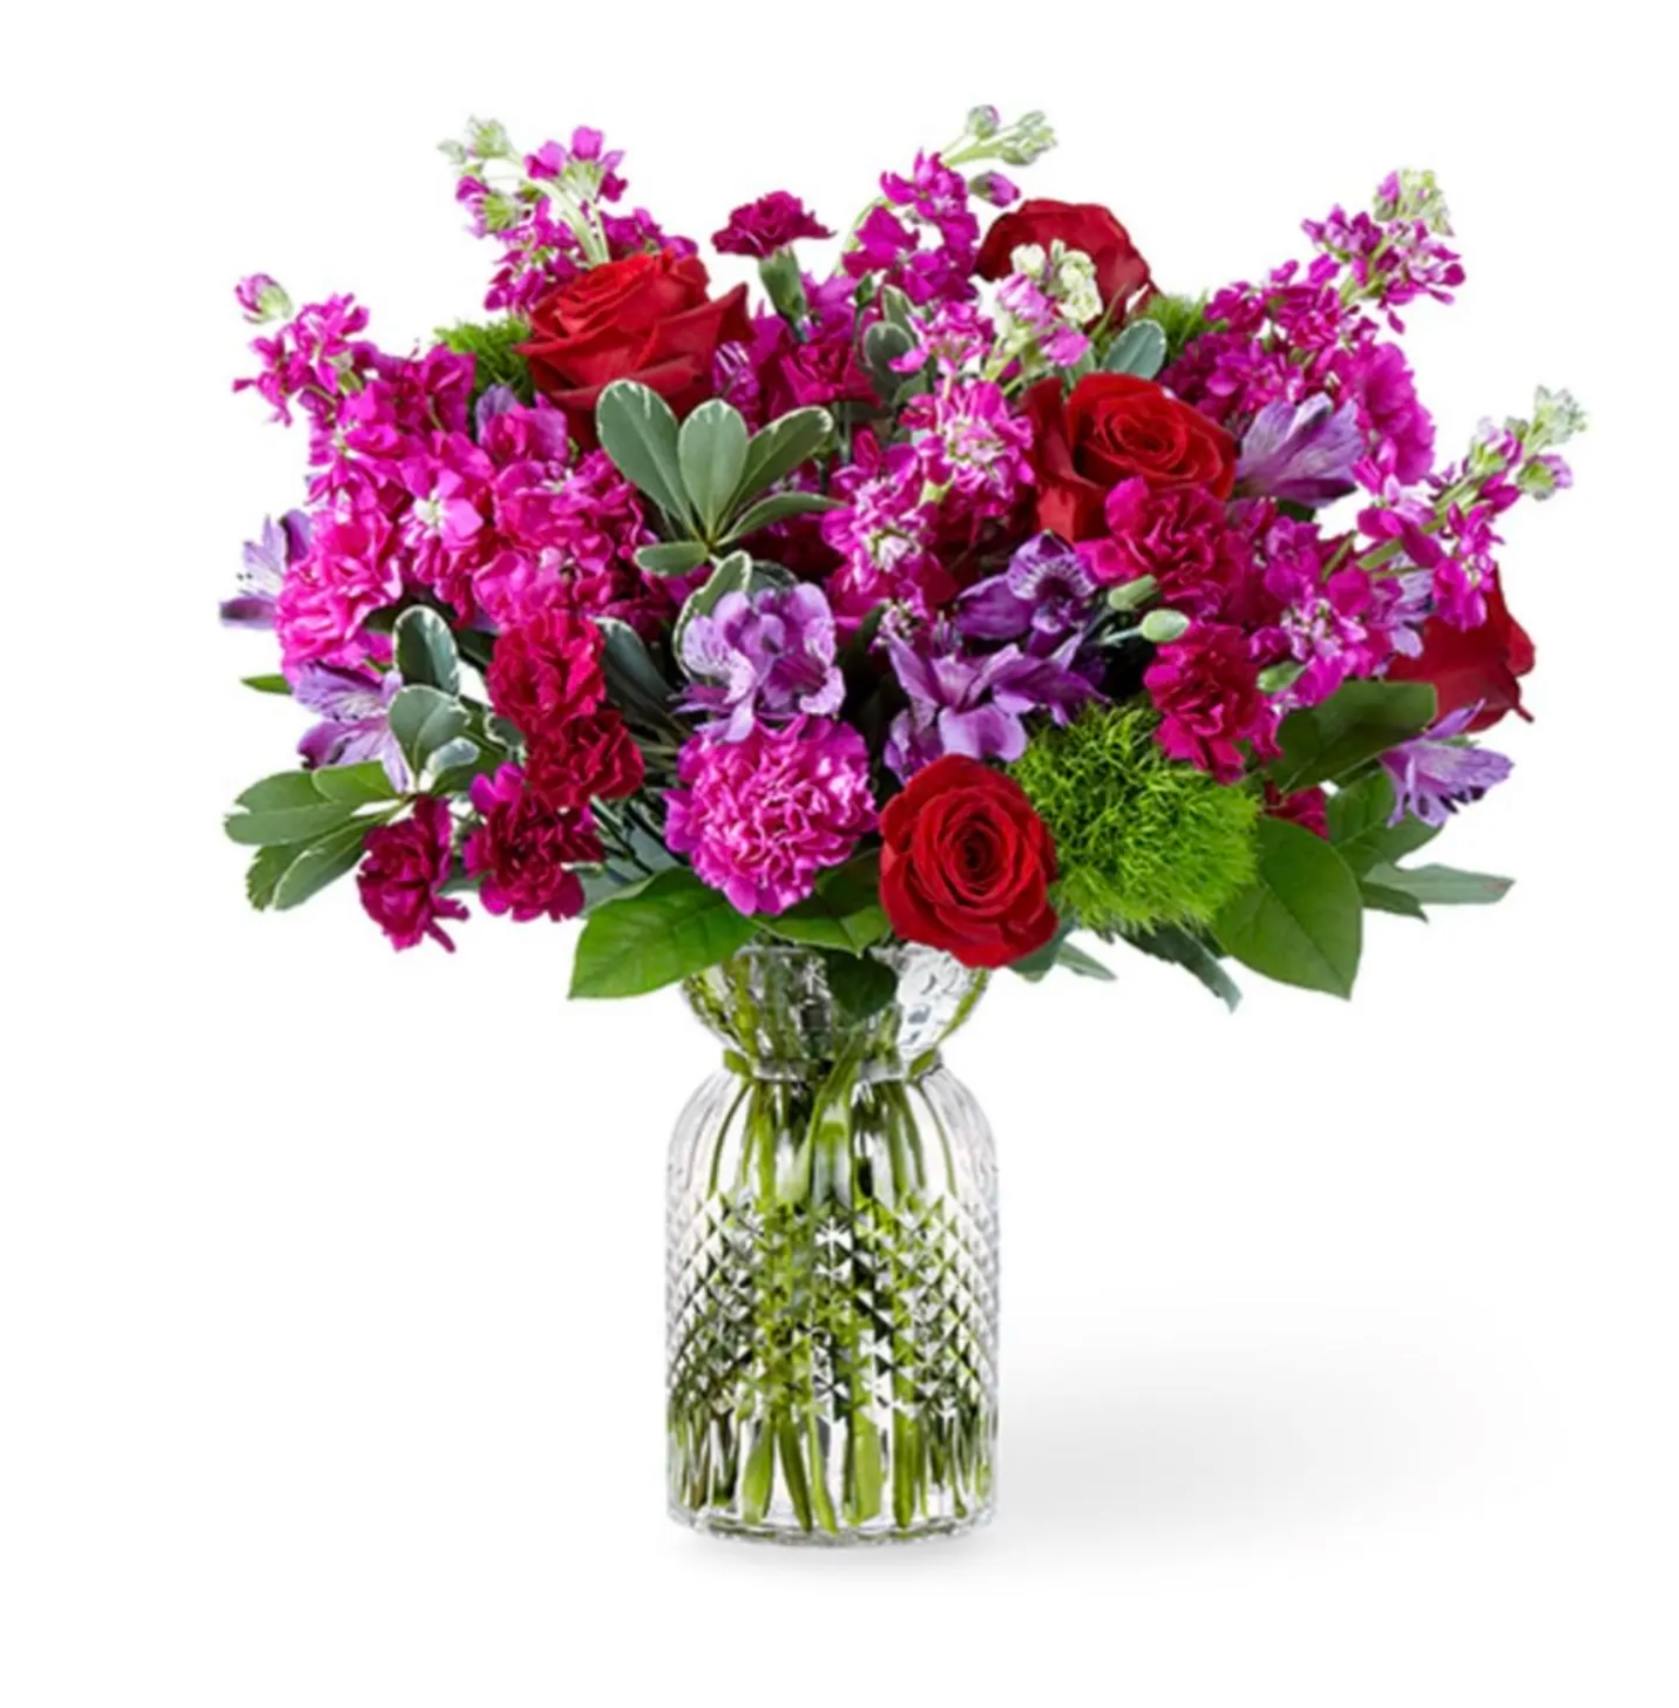 Sweet Thing Bouquet Premium - Love is sweet, love is bright, &amp; love is unique. Remind your Galentine, mom or someone special that you love them with this beautiful bouquet featuring carnations, pompons &amp; more beautiful flowers in a clear glass vase. 